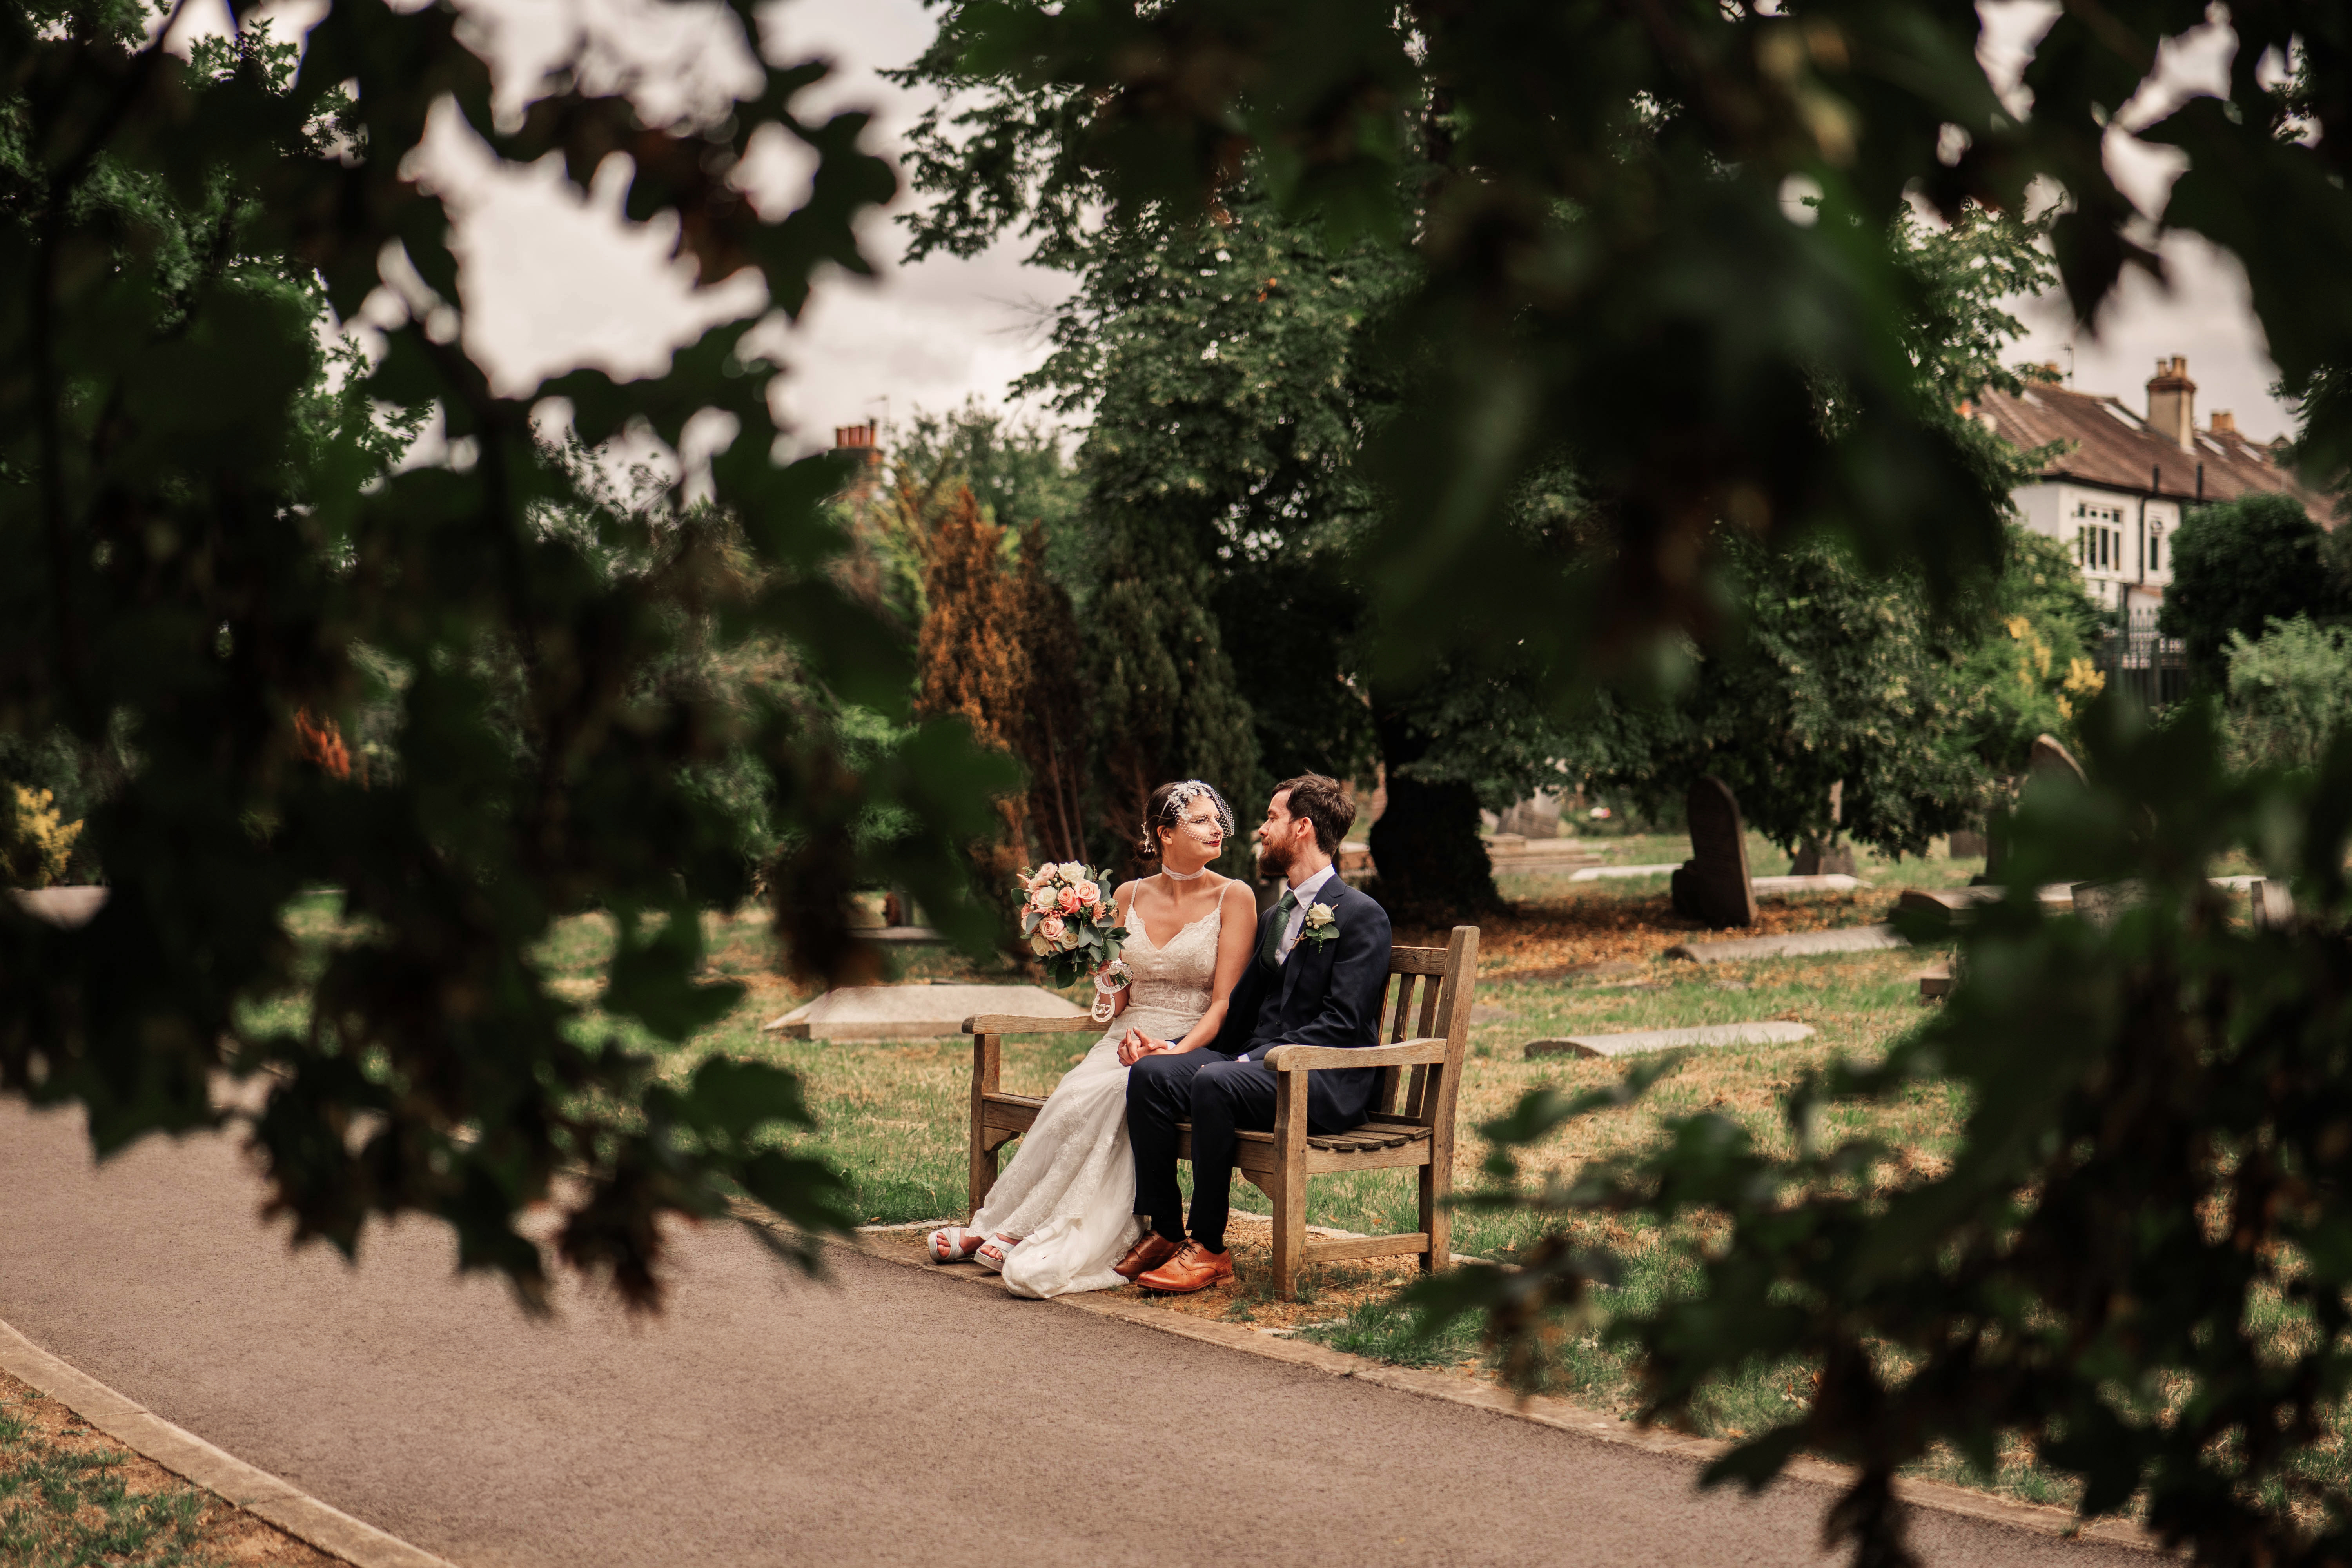 Wedding photo pair sitting in the park